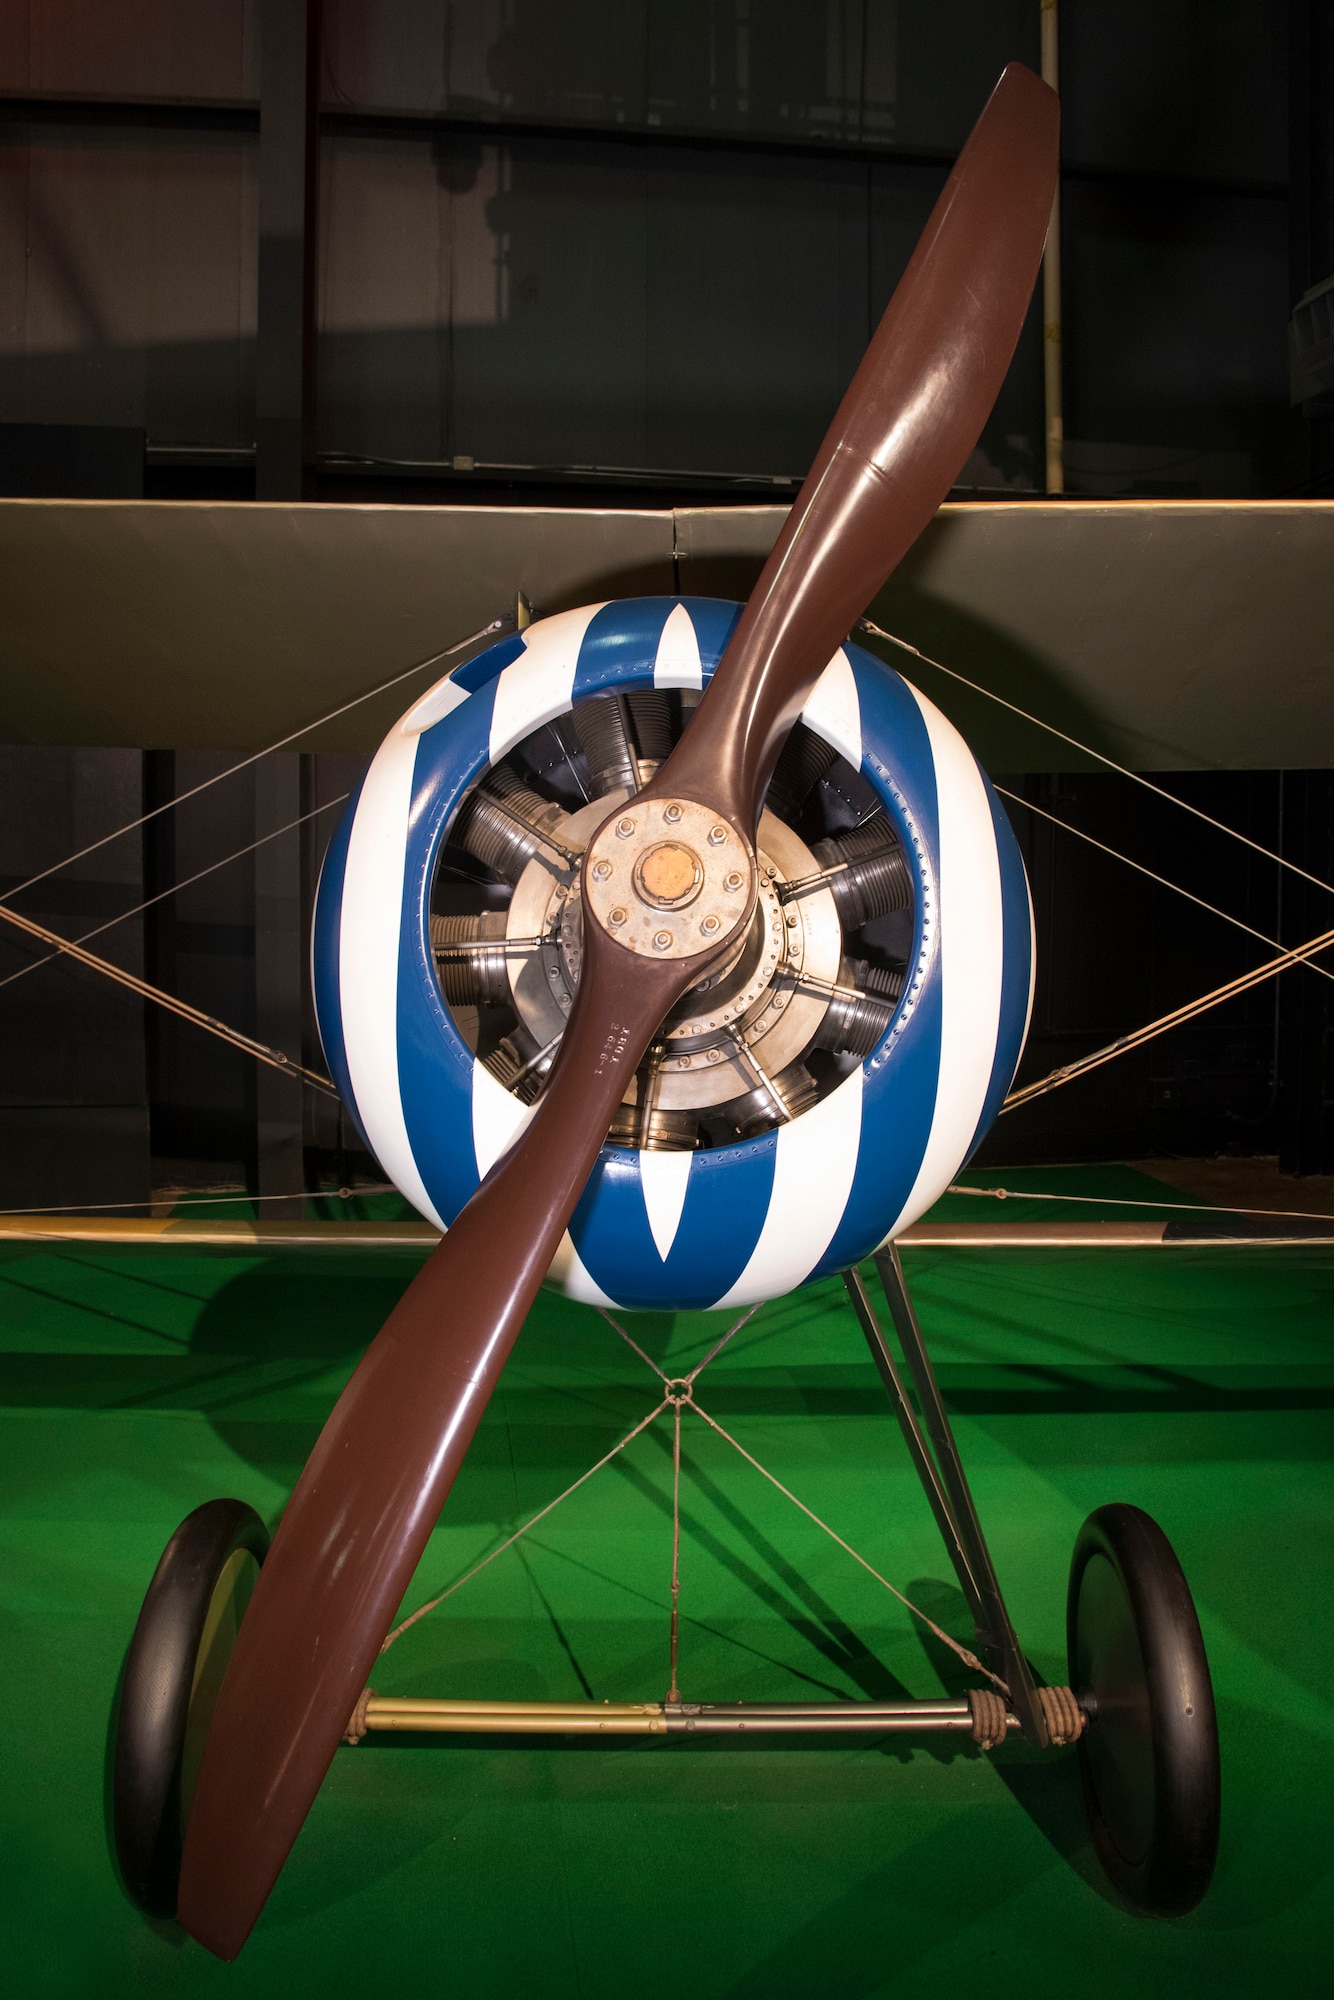 DAYTON, Ohio -- Nieuport N.28C-1 in the Early Years Gallery at the National Museum of the United States Air Force. (U.S. Air Force photo by Ken LaRock)